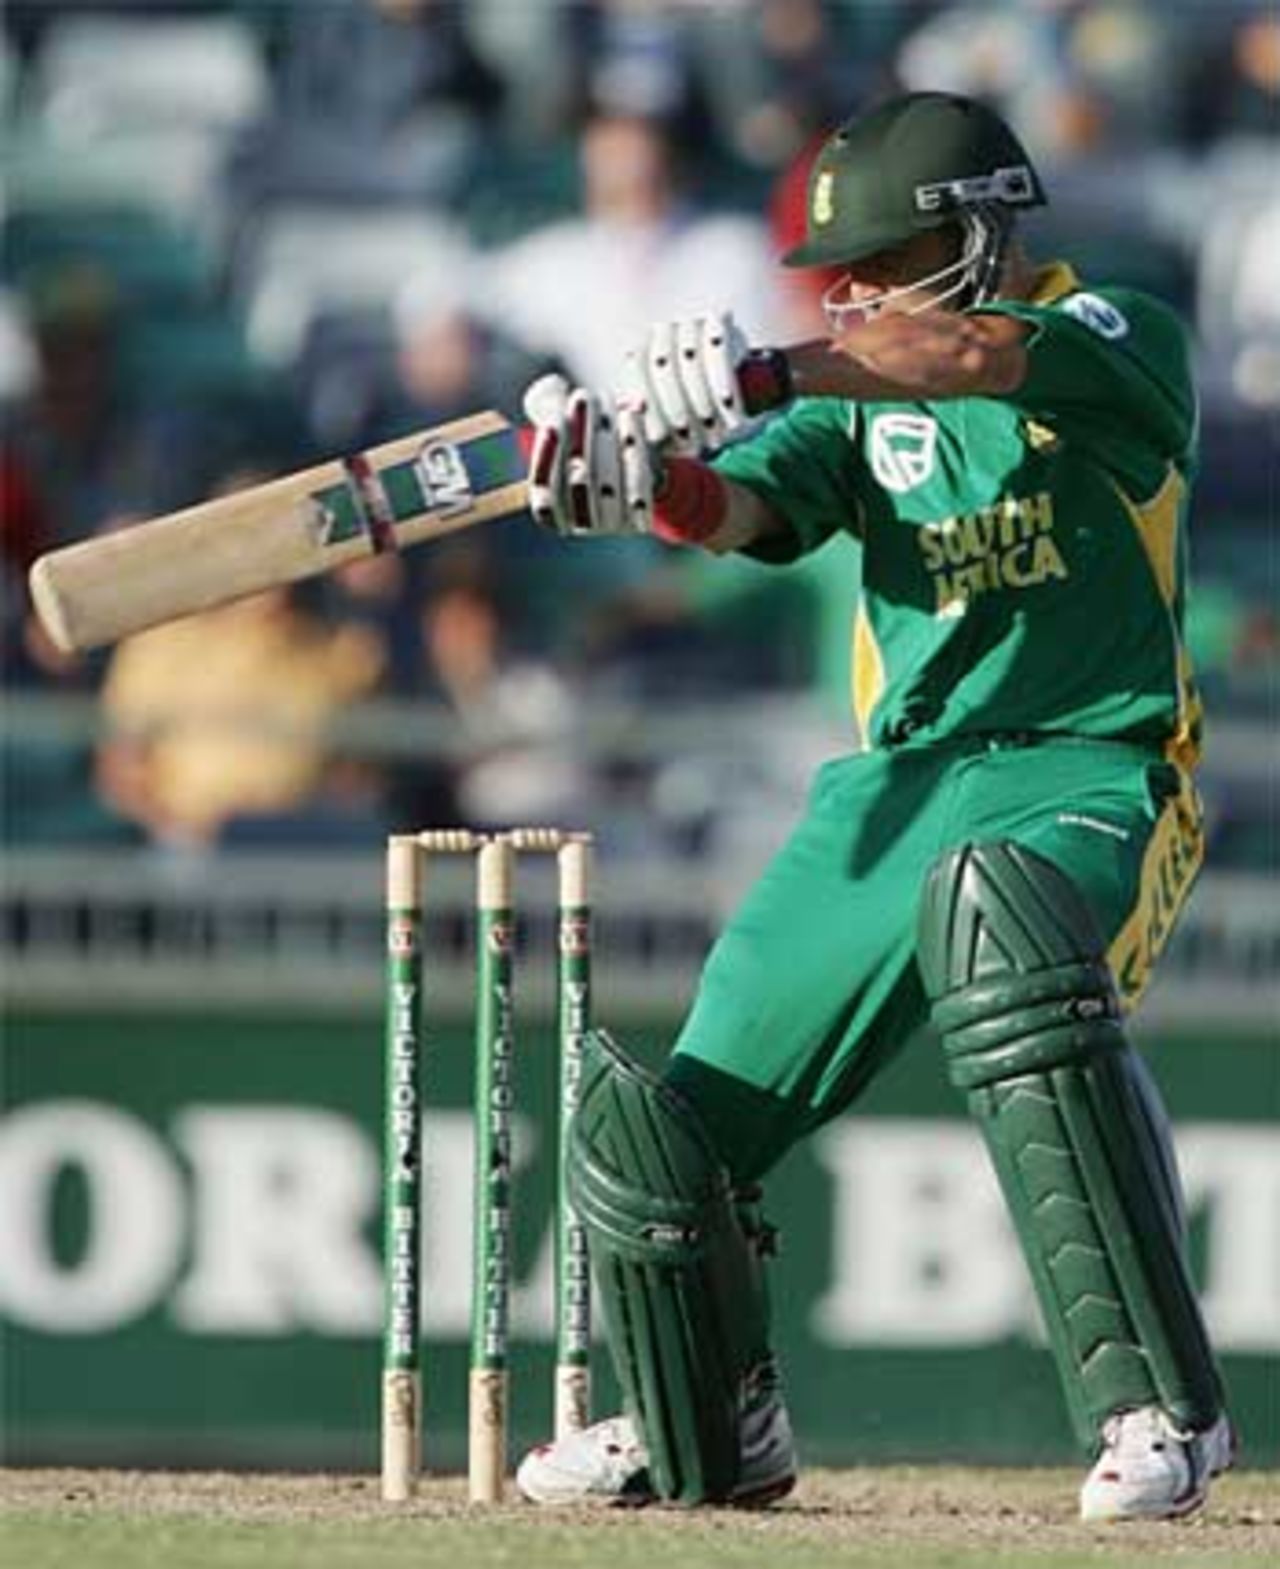 Boeta Dippenaar will be a danger man for South Africa as he averages 64.30 against West Indies